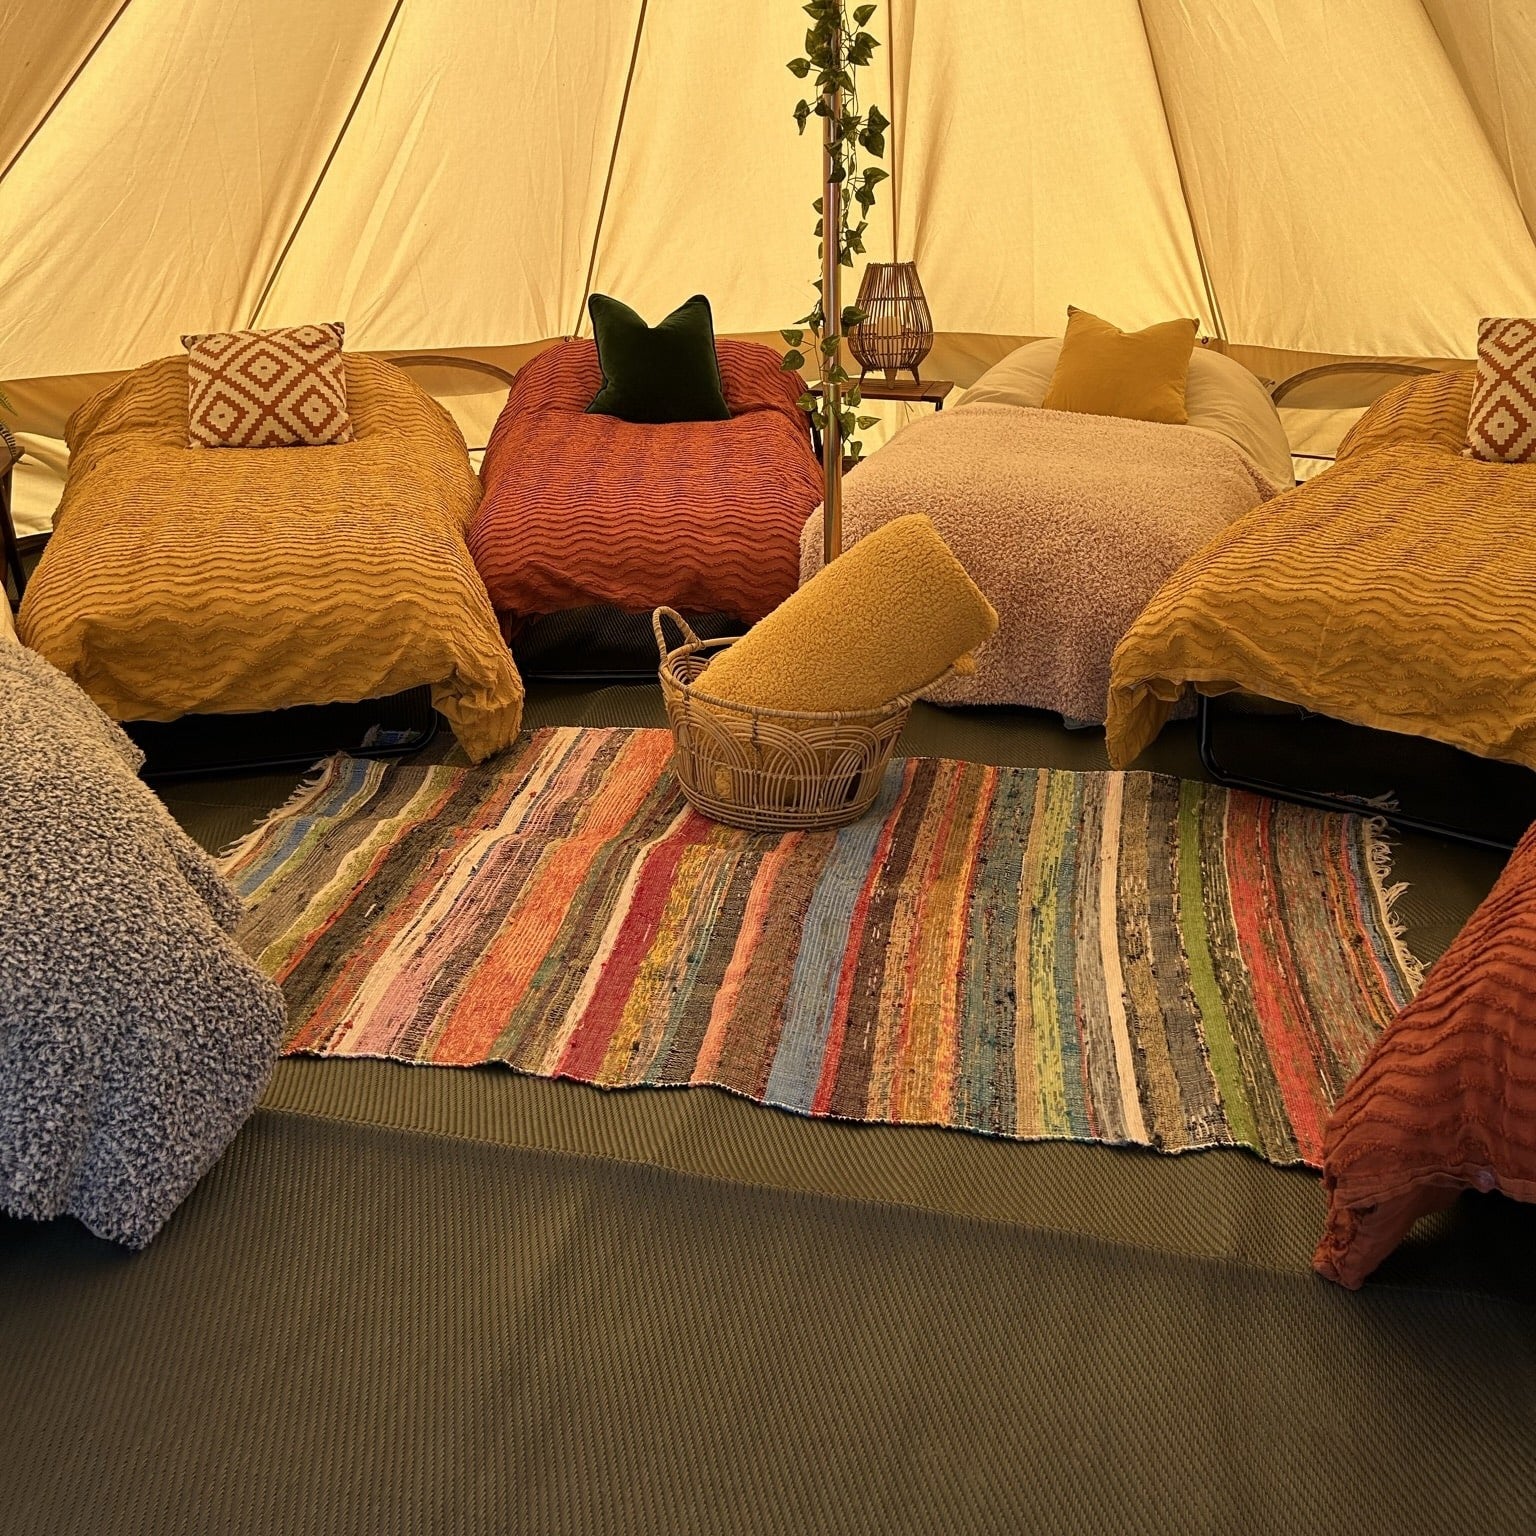 5m Bell Tent Fireproof With Stove Hole &amp; Flap - [Bell Tents]